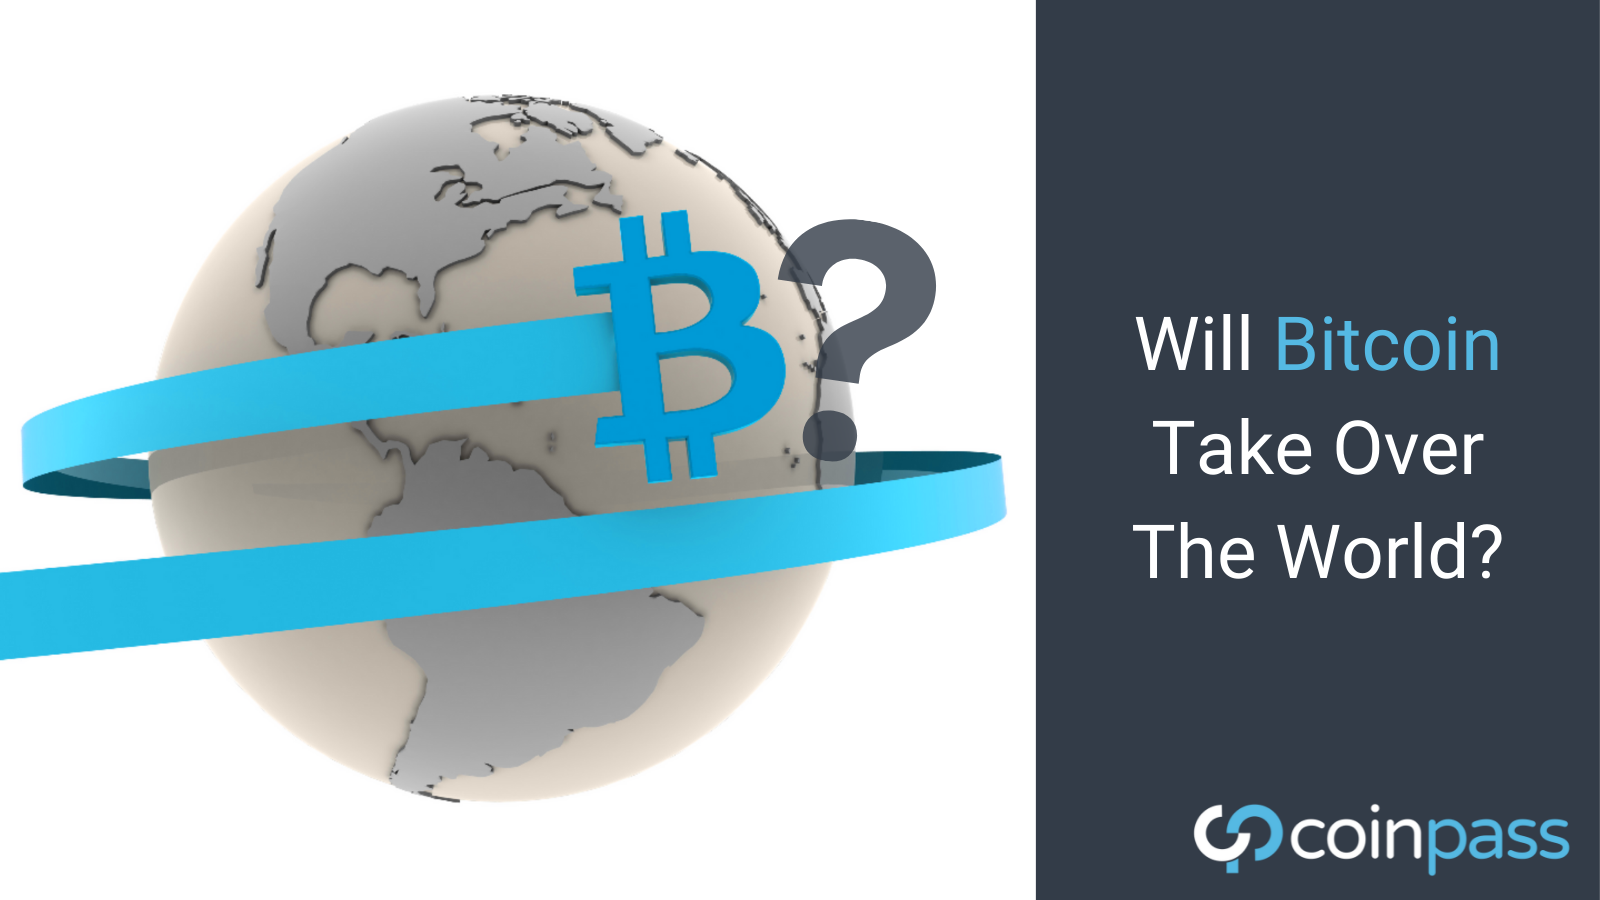 coinpass will bitcoin take over the world?